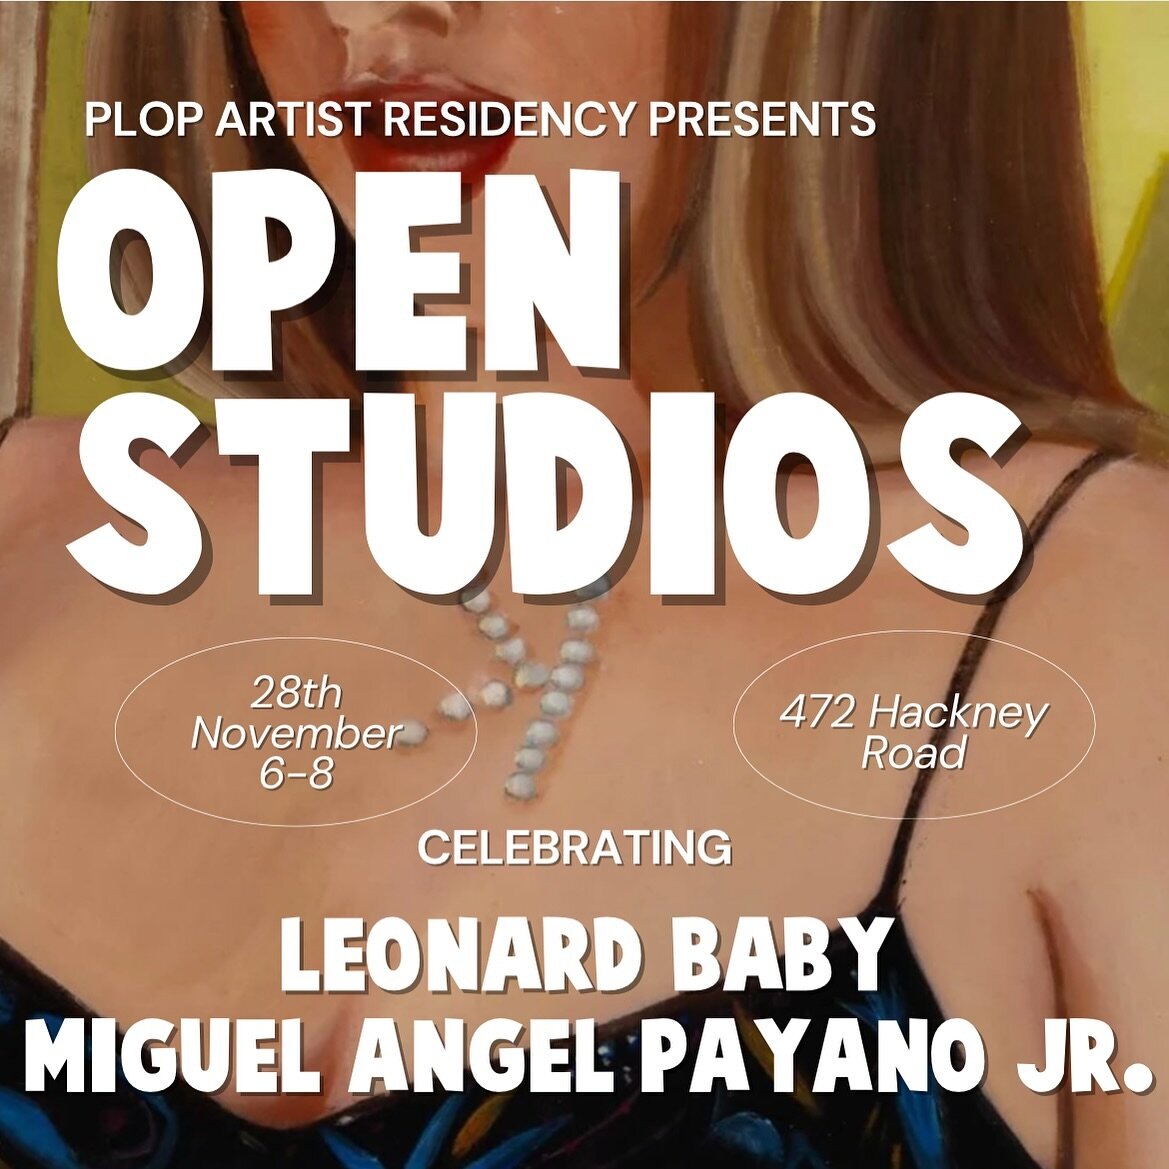 ‼️ Join next Tuesday (28th) for PLOP Open Studios 🔥

Come celebrate with us and see the work that these two international artists have produced during their stay in London!

@leonardbabyart @miguel_angel_payano_jr 

⏰ 6-8PM

#contemporarypainting #p